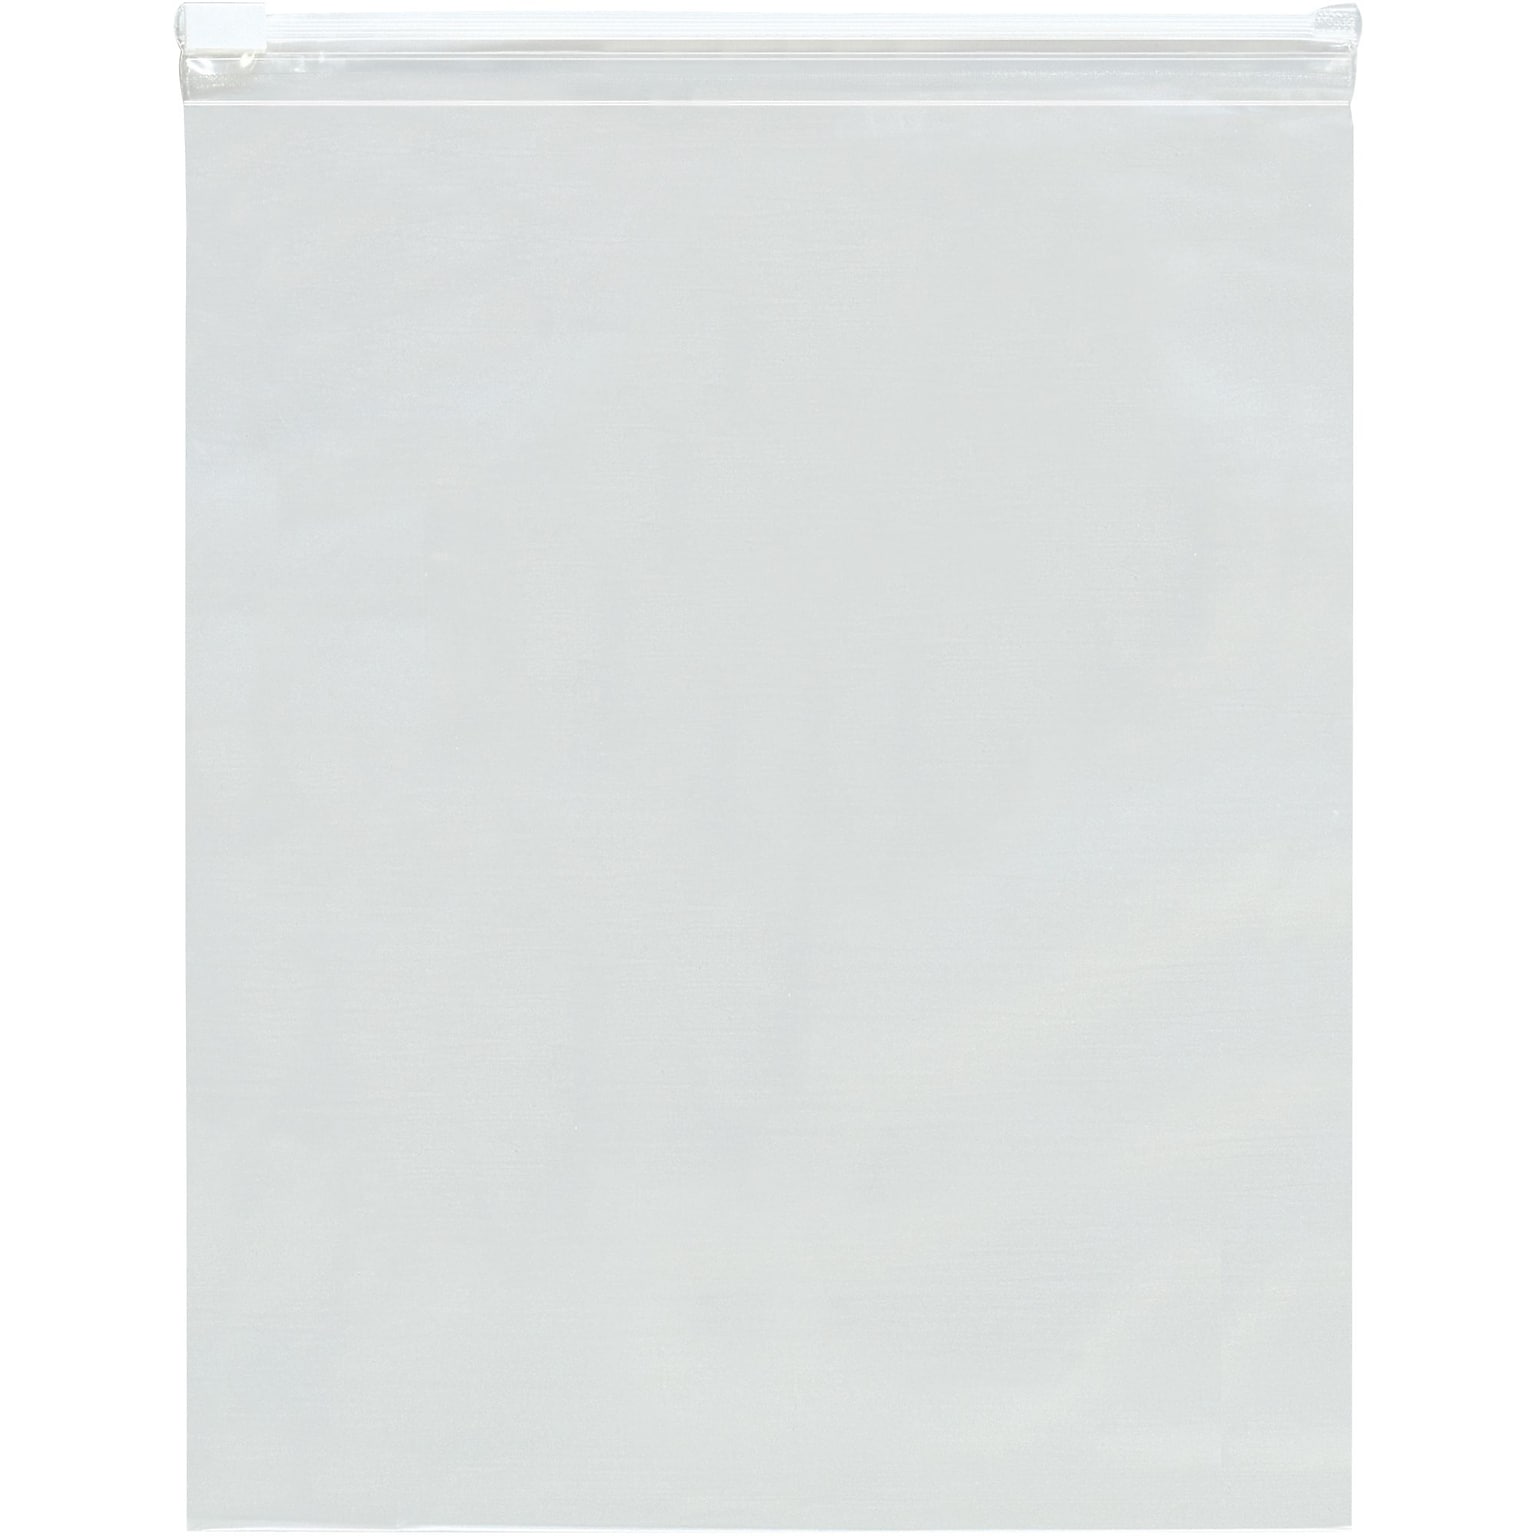 18 x 24 Reclosable Poly Bags, 3 Mil, Clear, 100/Carton (PB5250)